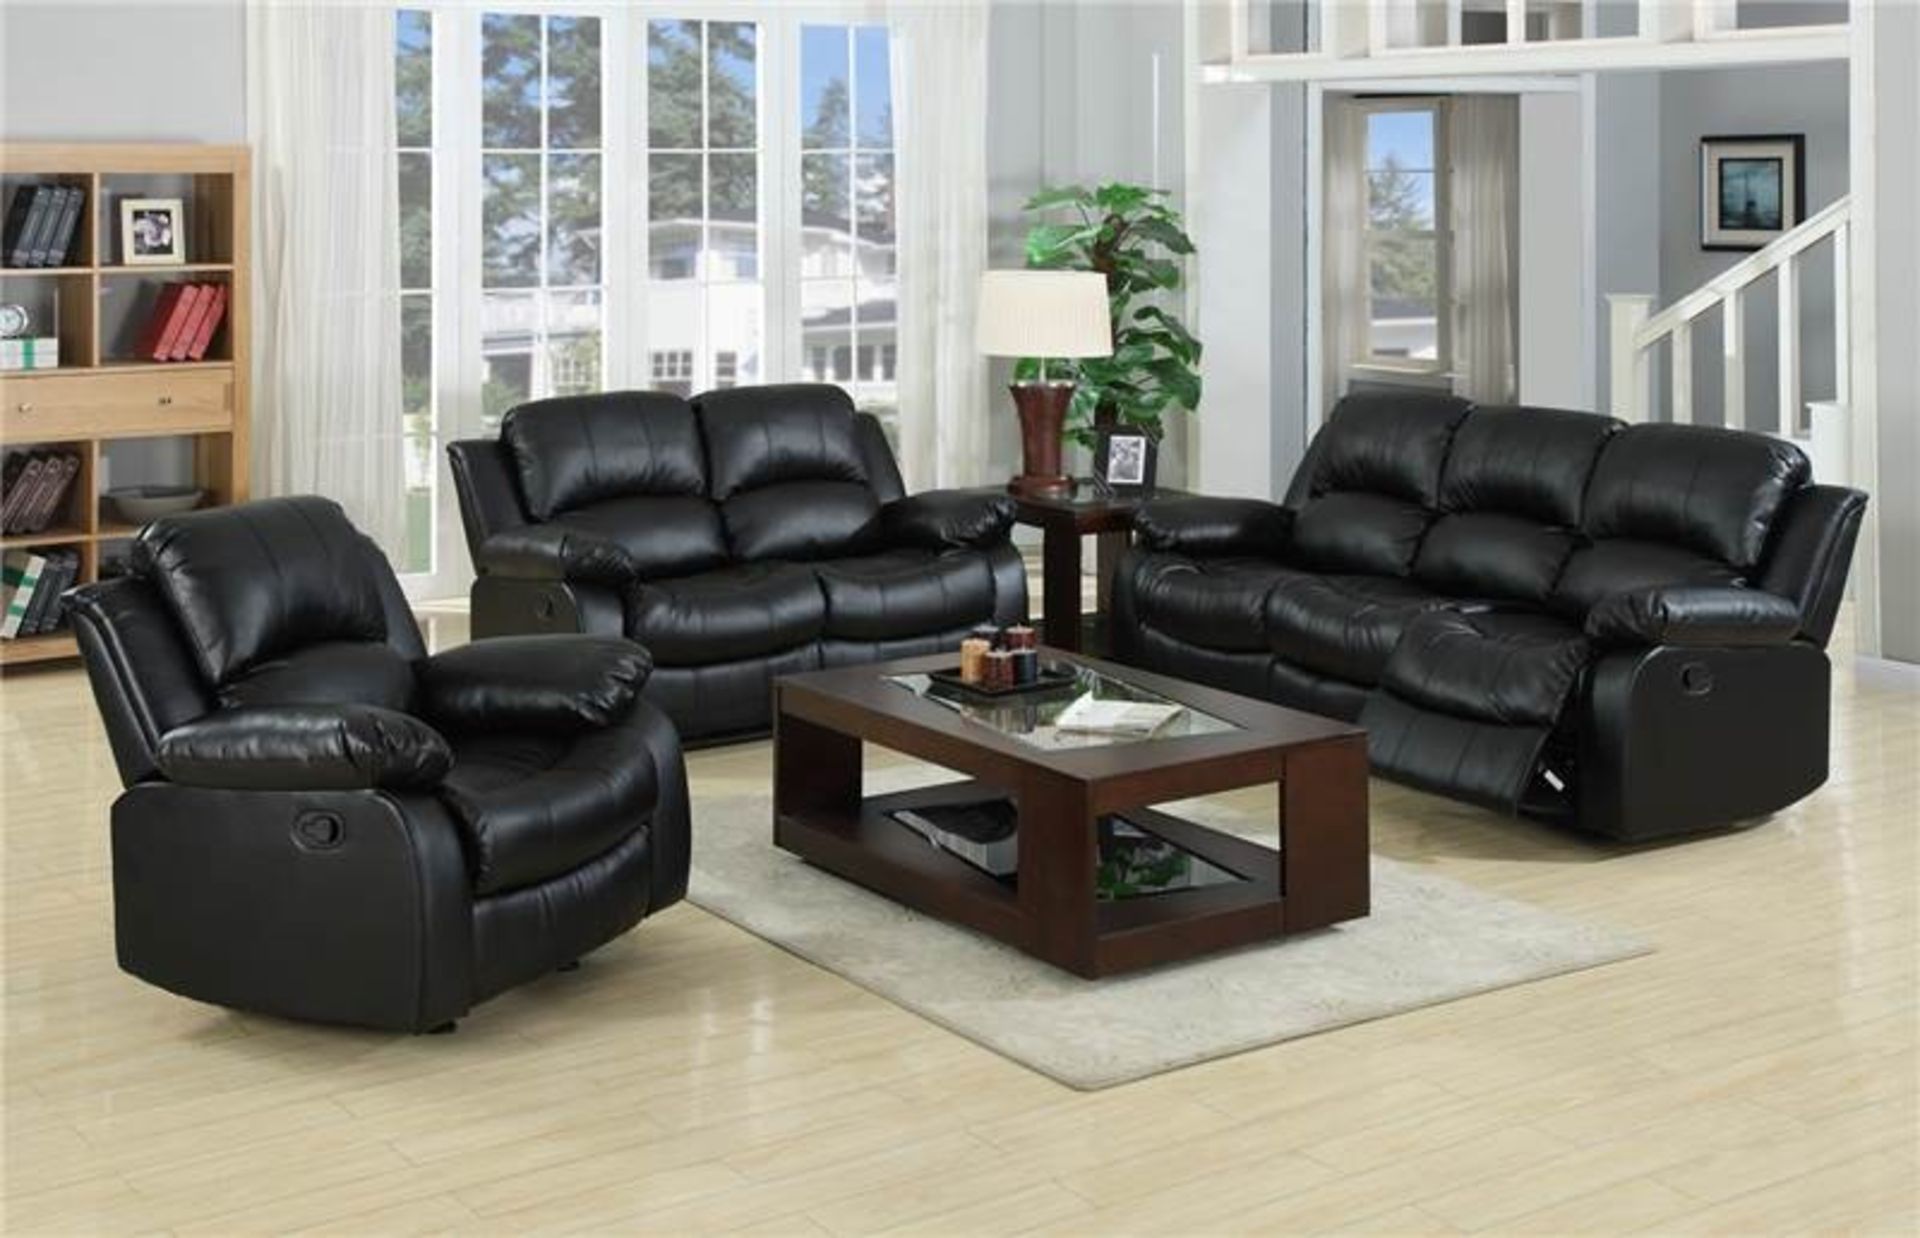 Brand new direct from the manufacturers 3 seater and 2 seater supreme valance black leather sofas